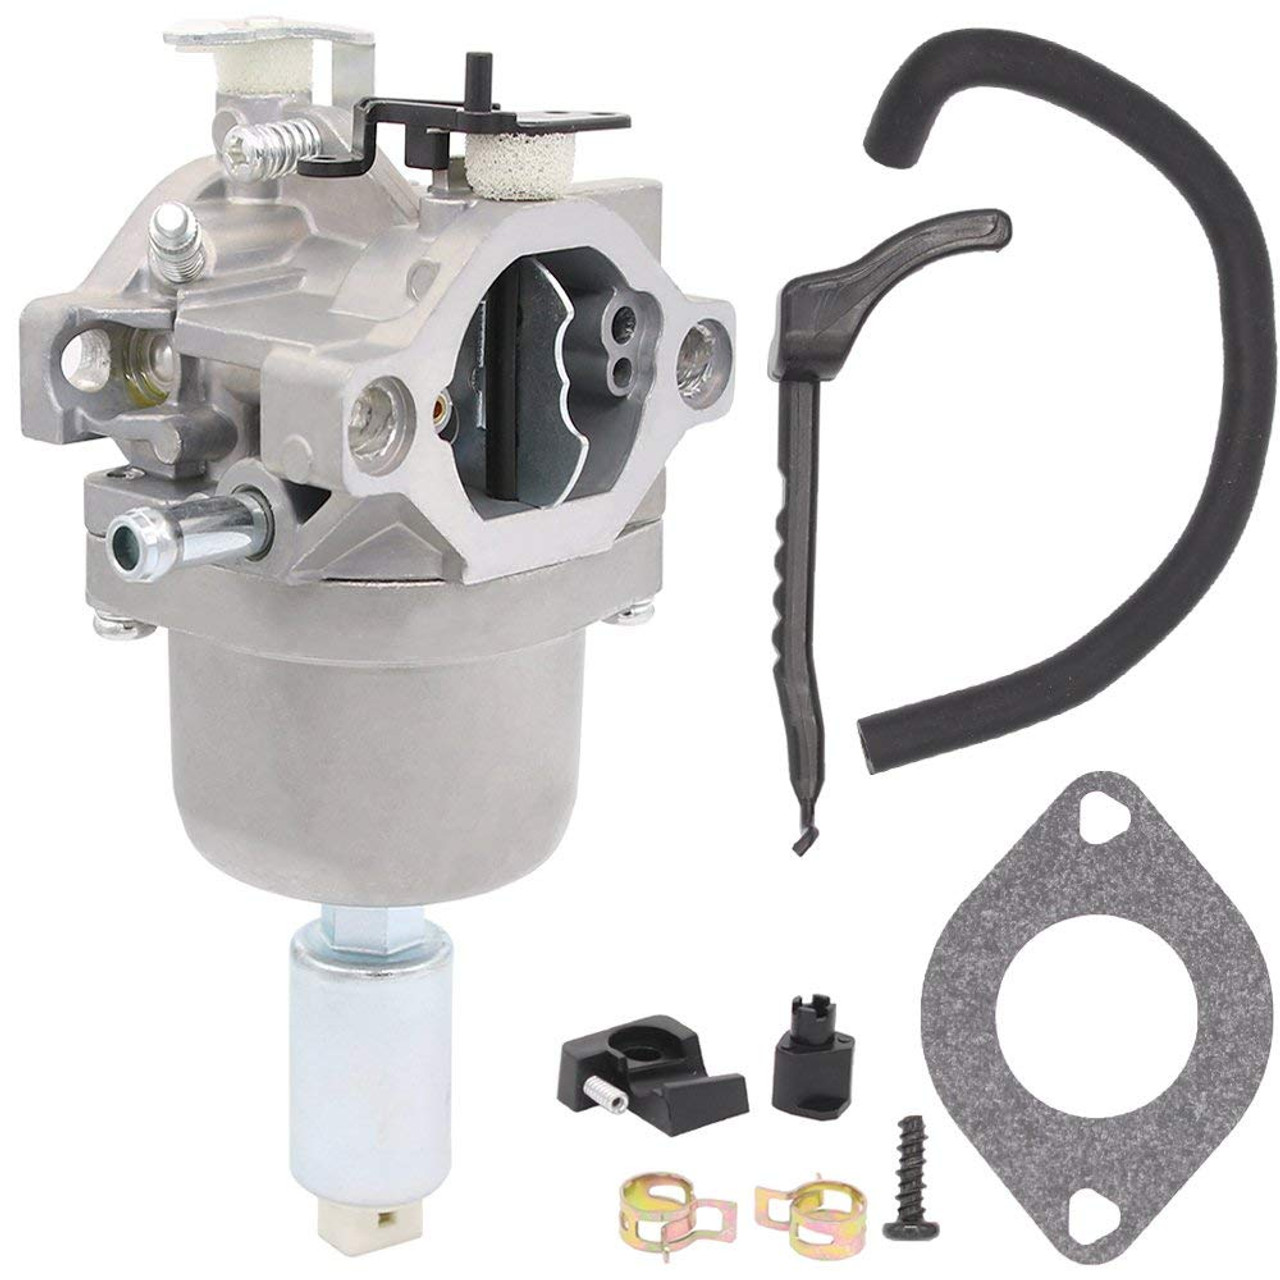 Briggs & Stratton 594593 Carburetor
Supercession: 591731 593514 697141 697190 698445 699109 699937 791858 791888 792171 792358 793224 790418 796109 794294 699916 593433-794572 
Where Used: Part Number 594593
Model Name Diagram
31A507-0133-G1 AIR CLEANER, BLOWER HOUSING, Exhaust System, FUEL SUPPLY
31A507-0133-G5 AIR CLEANER, BLOWER HOUSING, Exhaust System, FUEL SUPPLY
31A507-0135-G1 AIR CLEANER, BLOWER HOUSING, Exhaust System, FUEL SUPPLY
31A507-0135-G5 AIR CLEANER, BLOWER HOUSING, Exhaust System, FUEL SUPPLY
31A507-0138-B1 AIR CLEANER, BLOWER HOUSING, Exhaust System, FUEL SUPPLY
31A507-0140-B1 AIR CLEANER, BLOWER HOUSING, Exhaust System, FUEL SUPPLY
31A507-0144-G5 AIR CLEANER, BLOWER HOUSING, Exhaust System, FUEL SUPPLY
31A507-0871-G1 AIR CLEANER, BLOWER HOUSING, Exhaust System, FUEL SUPPLY
31A507-0871-G5 AIR CLEANER, BLOWER HOUSING, Exhaust System, FUEL SUPPLY
31A507-1498-G1 AIR CLEANER, BLOWER HOUSING, Exhaust System, FUEL SUPPLY
31A507-1498-G5 AIR CLEANER, BLOWER HOUSING, Exhaust System, FUEL SUPPLY
31A507-1516-B1 AIR CLEANER, BLOWER HOUSING, Exhaust System, FUEL SUPPLY
31A507-1516-G5 AIR CLEANER, BLOWER HOUSING, Exhaust System, FUEL SUPPLY
31A507-2391-B1 AIR CLEANER, BLOWER HOUSING, Exhaust System, FUEL SUPPLY
31A507-2471-B1 AIR CLEANER, BLOWER HOUSING, Exhaust System, FUEL SUPPLY
31A507-3405-G1 AIR CLEANER, BLOWER HOUSING, Exhaust System, FUEL SUPPLY
31A507-3405-G5 AIR CLEANER, BLOWER HOUSING, Exhaust System, FUEL SUPPLY
31A507-4111-B1 AIR CLEANER, BLOWER HOUSING, Exhaust System, FUEL SUPPLY
31A507-4117-B1 AIR CLEANER, BLOWER HOUSING, Exhaust System, FUEL SUPPLY
31A607-0037-B1 Ruixing Carburetor, Air Cleaner, Blower Housing, Exhaust System
31A607-0114-B1 Ruixing Carburetor, Air Cleaner, Blower Housing, Exhaust System
31A607-0114-E1 Ruixing Carburetor, Air Cleaner, Blower Housing, Exhaust System
31A607-0950-G5 Ruixing Carburetor, Air Cleaner, Blower Housing, Exhaust System
31A607-2470-B1 Ruixing Carburetor, Air Cleaner, Blower Housing, Exhaust System
31A707-0117-B1 Air Cleaner, Blower Housing, Kit - Ruixing Cauburetor Overhaul, Ruixing Carburetor
31A707-0121-B1 Air Cleaner, Blower Housing, Kit - Ruixing Cauburetor Overhaul, Ruixing Carburetor
31A707-0696-B1 Air Cleaner, Blower Housing, Kit - Ruixing Cauburetor Overhaul, Ruixing Carburetor
31A707-0796-B1 Air Cleaner, Blower Housing, Kit - Ruixing Cauburetor Overhaul, Ruixing Carburetor
31A707-0874-G1 Air Cleaner, Blower Housing, Kit - Ruixing Cauburetor Overhaul, Ruixing Carburetor
31A707-0874-G5 Air Cleaner, Blower Housing, Kit - Ruixing Cauburetor Overhaul, Ruixing Carburetor
31A707-1375-B1 Air Cleaner, Blower Housing, Kit - Ruixing Cauburetor Overhaul, Ruixing Carburetor
Page 1 of 8
31A707-1454-B1 Air Cleaner, Blower Housing, Kit - Ruixing Cauburetor Overhaul, Ruixing Carburetor
31A707-2121-B1 Air Cleaner, Blower Housing, Kit - Ruixing Cauburetor Overhaul, Ruixing Carburetor
31A707-2454-B1 Air Cleaner, Blower Housing, Kit - Ruixing Cauburetor Overhaul, Ruixing Carburetor
31A807-0905-G5 Kit - Nikki Carburetor Overhaul, Kit - Ruixing Carburetor Overhaul, Nikki Carburetor, Ruixing Carburetor
31C707-0985-G5 Air Cleaner, Blower Housing, Exhaust System, Fuel Supply
31C707-2429-B1 Air Cleaner, Blower Housing, Exhaust System, Fuel Supply
31C707-2506-B2 Air Cleaner, Blower Housing, Exhaust System, Fuel Supply
31C707-2826-B1 Air Cleaner, Blower Housing, Exhaust System, Fuel Supply
31C707-3005-G5 Air Cleaner, Blower Housing, Exhaust System, Fuel Supply
31C707-3026-G5 Air Cleaner, Blower Housing, Exhaust System,
31G777-4127-B1 Air Cleaner, Blower Housing, Carburetor - Ruixing, Kit-Carburetor Overhaul - Ruixing
31L777-0020-B1 Air Cleaner, Blower Housing, Carburetor - Ruixing, Fuel System, Kit - Carburetor Overhaul - Ruixing
31N707-0872-G1 Air Cleaner, Blower Housing, Carburetor - Ruixing, Kit - Carburetor Overhaul - Ruixing
31N707-0872-G5 Air Cleaner, Blower Housing, Carburetor - Ruixing, Kit - Carburetor Overhaul - Ruixing
31N707-2437-B1 Air Cleaner, Blower Housing, Carburetor - Ruixing, Kit - Carburetor Overhaul - Ruixing
31N707-2441-B1 Air Cleaner, Blower Housing, Carburetor - Ruixing, Kit - Carburetor Overhaul - Ruixing
31N707-2539-B1 Air Cleaner, Blower Housing, Carburetor - Ruixing, Kit - Carburetor Overhaul - Ruixing
31P707-0126-B1 Air Cleaner, Blower Housing, Exhaust System, Fuel Supply
31P707-0126-B2 Air Cleaner, Blower Housing, Exhaust System, Fuel Supply
31P707-0140-B1 Air Cleaner, Blower Housing, Exhaust System, Fuel Supply
31P707-0140-B2 Air Cleaner, Blower Housing, Exhaust System, Fuel Supply
31P707-0149-B1 Air Cleaner, Blower Housing, Exhaust System, Fuel Supply
31P707-0149-B2 Air Cleaner, Blower Housing, Exhaust System, Fuel Supply
31P707-0157-B1 Air Cleaner, Blower Housing, Exhaust System, Fuel Supply
31P707-0157-B2 Air Cleaner, Blower Housing, Exhaust System, Fuel Supply
31P707-0241-B1 Air Cleaner, Blower Housing, Exhaust System, Fuel Supply
31P707-0241-B2 Air Cleaner, Blower Housing, Exhaust System, Fuel Supply
31P707-0241-B5 Air Cleaner, Blower Housing, Exhaust System, Fuel Supply
31P707-0241-B6 Air Cleaner, Blower Housing, Exhaust System, Fuel Supply
31P707-0242-B1 Air Cleaner, Blower Housing, Exhaust System, Fuel Supply
31P707-0242-B2 Air Cleaner, Blower Housing, Exhaust System, Fuel Supply
31P707-0372-B1 Air Cleaner, Blower Housing, Exhaust System, Fuel Supply
31P707-0372-B2 Air Cleaner, Blower Housing, Exhaust System, Fuel Supply
31P707-0373-B1 Air Cleaner, Blower Housing, Exhaust System, Fuel Supply
31P707-0373-B2 Air Cleaner, Blower Housing, Exhaust System, Fuel Supply
31P777-0001-B1 Air Cleaner, Blower Housing, Exhaust System, Fuel Supply
31P777-0002-G6 Air Cleaner, Blower Housing, Exhaust System, Fuel Supply
31P777-0110-B1 Air Cleaner, Blower Housing, Exhaust System, Fuel Supply
31P777-0146-G1 Air Cleaner, Blower Housing, Exhaust System, Fuel Supply
31P777-0146-G2 Air Cleaner, Blower Housing, Exhaust System, Fuel Supply
31P777-0153-B1 Air Cleaner, Blower Housing, Exhaust System, Fuel Supply
31P777-0156-G1 Air Cleaner, Blower Housing, Exhaust System, Fuel Supply
Page 3 of 8
31P777-0156-G5 Air Cleaner, Blower Housing, Exhaust System, Fuel Supply
31P777-0237-G1 Air Cleaner, Blower Housing, Exhaust System, Fuel Supply
31P777-0237-G5 Air Cleaner, Blower Housing, Exhaust System, Fuel Supply
31P777-0237-G6 Air Cleaner, Blower Housing, Exhaust System, Fuel Supply
31P777-0238-G5 Air Cleaner, Blower Housing, Exhaust System, Fuel Supply
31P777-2770-B1 Air Cleaner, Blower Housing, Exhaust System, Fuel Supply
31P777-3202-G5 Air Cleaner, Blower Housing, Exhaust System, Fuel Supply
31P777-3462-G5 Air Cleaner, Blower Housing, Exhaust System, Fuel Supply
31Q507-0002-H1 CARBURETOR, FUEL SUPPLY, KIT - CARBURETOR OVERHAUL
31Q507-0004-H1 CARBURETOR, FUEL SUPPLY, KIT - CARBURETOR OVERHAUL
31Q507-0006-H1 CARBURETOR, FUEL SUPPLY, KIT - CARBURETOR OVERHAUL
31Q507-0008-H1 CARBURETOR, FUEL SUPPLY, KIT - CARBURETOR OVERHAUL
31Q507-0010-H1 CARBURETOR, FUEL SUPPLY, KIT - CARBURETOR OVERHAUL
31Q507-0011-H1 CARBURETOR, FUEL SUPPLY, KIT - CARBURETOR OVERHAUL
31Q507-0012-H1 CARBURETOR, FUEL SUPPLY, KIT - CARBURETOR OVERHAUL
31Q577-0009-H1 CARBURETOR, FUEL SUPPLY, KIT - CARBURETOR OVERHAUL
31Q577-0013-H1 CARBURETOR, FUEL SUPPLY, KIT - CARBURETOR OVERHAUL
31Q777-0215-B1 Carburetor - Ruixing, FUEL SUPPLY, Kit - Carburetor Overhaul - Ruixing
31Q777-0215-E1 Carburetor - Ruixing, FUEL SUPPLY, Kit - Carburetor Overhaul - Ruixing
31R507-0001-B1 CARBURETOR, FUEL SUPPLY, KIT - CARBURETOR OVERHAUL
31R507-0002-G1 CARBURETOR, FUEL SUPPLY, KIT - CARBURETOR OVERHAUL
31R507-0003-B1 CARBURETOR, FUEL SUPPLY, KIT - CARBURETOR OVERHAUL
31R507-0004-B1 CARBURETOR, FUEL SUPPLY, KIT - CARBURETOR OVERHAUL
31R507-0005-B1 CARBURETOR, FUEL SUPPLY, KIT - CARBURETOR OVERHAUL
31R507-0006-B1 CARBURETOR, FUEL SUPPLY, KIT - CARBURETOR OVERHAUL
31R507-0007-B1 CARBURETOR, FUEL SUPPLY, KIT - CARBURETOR OVERHAUL
31R507-0008-B1 CARBURETOR, FUEL SUPPLY, KIT - CARBURETOR OVERHAUL
31R507-0011-B1 CARBURETOR, FUEL SUPPLY, KIT - CARBURETOR OVERHAUL
31R507-0012-B1 CARBURETOR, FUEL SUPPLY, KIT - CARBURETOR OVERHAUL
31R507-0013-B1 CARBURETOR, FUEL SUPPLY, KIT - CARBURETOR OVERHAUL
31R507-0015-B1 CARBURETOR, FUEL SUPPLY, KIT - CARBURETOR OVERHAUL
31R507-0016-B1 CARBURETOR, FUEL SUPPLY, KIT - CARBURETOR OVERHAUL
Page 4 of 8
31R507-0018-B1 CARBURETOR, FUEL SUPPLY, KIT - CARBURETOR OVERHAUL
31R507-0021-B1 CARBURETOR, FUEL SUPPLY, KIT - CARBURETOR OVERHAUL
31R507-0022-B1 CARBURETOR, FUEL SUPPLY, KIT - CARBURETOR OVERHAUL
31R507-0023-B1 CARBURETOR, FUEL SUPPLY, KIT - CARBURETOR OVERHAUL
31R507-0024-B1 CARBURETOR, FUEL SUPPLY, KIT - CARBURETOR OVERHAUL
31R507-0025-B1 CARBURETOR, FUEL SUPPLY, KIT - CARBURETOR OVERHAUL
31R507-0029-B1 CARBURETOR, FUEL SUPPLY, KIT - CARBURETOR OVERHAUL
31R507-0030-B1 CARBURETOR, FUEL SUPPLY, KIT - CARBURETOR OVERHAUL
31R507-0036-B1 CARBURETOR, FUEL SUPPLY, KIT - CARBURETOR OVERHAUL
31R577-0009-B1 CARBURETOR, FUEL SUPPLY, KIT - CARBURETOR OVERHAUL
31R577-0010-B1 CARBURETOR, FUEL SUPPLY, KIT - CARBURETOR OVERHAUL
31R577-0014-B1 CARBURETOR, FUEL SUPPLY, KIT - CARBURETOR OVERHAUL
31R577-0017-B1 CARBURETOR, FUEL SUPPLY, KIT - CARBURETOR OVERHAUL
31R577-0019-B1 CARBURETOR, FUEL SUPPLY, KIT - CARBURETOR OVERHAUL
31R577-0020-B1 CARBURETOR, FUEL SUPPLY, KIT - CARBURETOR OVERHAUL
31R577-0026-B1 CARBURETOR, FUEL SUPPLY, KIT - CARBURETOR OVERHAUL
31R577-0027-B1 CARBURETOR, FUEL SUPPLY, KIT - CARBURETOR OVERHAUL
31R577-0028-B1 CARBURETOR, FUEL SUPPLY, KIT - CARBURETOR OVERHAUL
31R577-0031-B1 CARBURETOR, FUEL SUPPLY, KIT - CARBURETOR OVERHAUL
31R577-0032-B1 CARBURETOR, FUEL SUPPLY, KIT - CARBURETOR OVERHAUL
31R577-0033-B1 CARBURETOR, FUEL SUPPLY, KIT - CARBURETOR OVERHAUL
31R577-0034-B1 CARBURETOR, FUEL SUPPLY, KIT - CARBURETOR OVERHAUL
31R577-0035-G1 CARBURETOR, FUEL SUPPLY, KIT - CARBURETOR OVERHAUL
31R607-0001-B1 CARBURETORS - Nikki & Ruixning, FUEL SUPPLY, KIT - CARBURETOR OVERHAUL
31R607-0003-B1 CARBURETORS - Nikki & Ruixning, FUEL SUPPLY, KIT - CARBURETOR OVERHAUL
31R607-0005-G1 CARBURETORS - Nikki & Ruixning, FUEL SUPPLY, KIT - CARBURETOR OVERHAUL
31R607-0006-G1 CARBURETORS - Nikki & Ruixning, FUEL SUPPLY, KIT - CARBURETOR OVERHAUL
31R607-0007-G1 CARBURETORS - Nikki & Ruixning, FUEL SUPPLY, KIT - CARBURETOR OVERHAUL
31R607-0009-G1 CARBURETORS - Nikki & Ruixning, FUEL SUPPLY, KIT - CARBURETOR OVERHAUL
31R607-0011-G1 CARBURETORS - Nikki & Ruixning, FUEL SUPPLY, KIT - CARBURETOR OVERHAUL
31R607-0012-B1 CARBURETORS - Nikki & Ruixning, FUEL SUPPLY, KIT - CARBURETOR OVERHAUL
31R607-0013-B1 CARBURETORS - Nikki & Ruixning, FUEL SUPPLY, KIT - CARBURETOR OVERHAUL
Page 5 of 8
31R607-0014-B1 CARBURETORS - Nikki & Ruixning, FUEL SUPPLY, KIT - CARBURETOR OVERHAUL
31R607-0015-B1 CARBURETORS - Nikki & Ruixning, FUEL SUPPLY, KIT - CARBURETOR OVERHAUL
31R607-0016-B1 CARBURETORS - Nikki & Ruixning, FUEL SUPPLY, KIT - CARBURETOR OVERHAUL
31R607-0018-B1 CARBURETORS - Nikki & Ruixning, FUEL SUPPLY, KIT - CARBURETOR OVERHAUL
31R677-0002-B1 CARBURETORS - Nikki & Ruixning, FUEL SUPPLY, KIT - CARBURETOR OVERHAUL
31R677-0004-B1 CARBURETORS - Nikki & Ruixning, FUEL SUPPLY, KIT - CARBURETOR OVERHAUL
31R677-0008-G1 CARBURETORS - Nikki & Ruixning, FUEL SUPPLY, KIT - CARBURETOR OVERHAUL
31R677-0010-G1 CARBURETORS - Nikki & Ruixning, FUEL SUPPLY, KIT - CARBURETOR OVERHAUL
31R677-0017-G1 CARBURETORS - Nikki & Ruixning, FUEL SUPPLY, KIT - CARBURETOR OVERHAUL
31R707-0001-G1 CARBURETOR, FUEL SUPPLY, KIT - CARBURETOR OVERHAUL
31R707-0004-B1 CARBURETOR, FUEL SUPPLY, KIT - CARBURETOR OVERHAUL
31R707-0008-B1 CARBURETOR, FUEL SUPPLY, KIT - CARBURETOR OVERHAUL
31R707-0012-B1 CARBURETOR, FUEL SUPPLY, KIT - CARBURETOR OVERHAUL
31R707-0013-G1 CARBURETOR, FUEL SUPPLY, KIT - CARBURETOR OVERHAUL
31R707-0017-B1 CARBURETOR, FUEL SUPPLY, KIT - CARBURETOR OVERHAUL
31R707-0020-G1 CARBURETOR, FUEL SUPPLY, KIT - CARBURETOR OVERHAUL
31R707-0021-G1 CARBURETOR, FUEL SUPPLY, KIT - CARBURETOR OVERHAUL
31R707-0023-G1 CARBURETOR, FUEL SUPPLY, KIT - CARBURETOR OVERHAUL
31R707-0024-B1 CARBURETOR, FUEL SUPPLY, KIT - CARBURETOR OVERHAUL
31R707-0025-B1 CARBURETOR, FUEL SUPPLY, KIT - CARBURETOR OVERHAUL
31R707-0028-B1 CARBURETOR, FUEL SUPPLY, KIT - CARBURETOR OVERHAUL
31R707-0033-G1 CARBURETOR, FUEL SUPPLY, KIT - CARBURETOR OVERHAUL
31R707-0034-G1 CARBURETOR, FUEL SUPPLY, KIT - CARBURETOR OVERHAUL
31R707-0035-B1 CARBURETOR, FUEL SUPPLY, KIT - CARBURETOR OVERHAUL
31R707-0037-B1 CARBURETOR, FUEL SUPPLY, KIT - CARBURETOR OVERHAUL
31R707-0038-B1 CARBURETOR, FUEL SUPPLY, KIT - CARBURETOR OVERHAUL
31R707-0040-B1 CARBURETOR, FUEL SUPPLY, KIT - CARBURETOR OVERHAUL
31R707-0041-B1 CARBURETOR, FUEL SUPPLY, KIT - CARBURETOR OVERHAUL
31R777-0002-B1 CARBURETOR, FUEL SUPPLY, KIT - CARBURETOR OVERHAUL
31R777-0003-B1 CARBURETOR, FUEL SUPPLY, KIT - CARBURETOR OVERHAUL
31R777-0005-B1 CARBURETOR, FUEL SUPPLY, KIT - CARBURETOR OVERHAUL
31R777-0006-B1 CARBURETOR, FUEL SUPPLY, KIT - CARBURETOR OVERHAUL
Page 6 of 8
31R777-0007-B1 CARBURETOR, FUEL SUPPLY, KIT - CARBURETOR OVERHAUL
31R777-0009-B1 CARBURETOR, FUEL SUPPLY, KIT - CARBURETOR OVERHAUL
31R777-0010-B1 CARBURETOR, FUEL SUPPLY, KIT - CARBURETOR OVERHAUL
31R777-0011-B1 CARBURETOR, FUEL SUPPLY, KIT - CARBURETOR OVERHAUL
31R777-0014-B1 CARBURETOR, FUEL SUPPLY, KIT - CARBURETOR OVERHAUL
31R777-0015-B1 CARBURETOR, FUEL SUPPLY, KIT - CARBURETOR OVERHAUL
31R777-0016-B1 CARBURETOR, FUEL SUPPLY, KIT - CARBURETOR OVERHAUL
31R777-0018-B1 CARBURETOR, FUEL SUPPLY, KIT - CARBURETOR OVERHAUL
31R777-0019-B1 CARBURETOR, FUEL SUPPLY, KIT - CARBURETOR OVERHAUL
31R777-0022-B1 CARBURETOR, FUEL SUPPLY, KIT - CARBURETOR OVERHAUL
31R777-0026-G1 CARBURETOR, FUEL SUPPLY, KIT - CARBURETOR OVERHAUL
31R777-0027-B1 CARBURETOR, FUEL SUPPLY, KIT - CARBURETOR OVERHAUL
31R777-0029-B1 CARBURETOR, FUEL SUPPLY, KIT - CARBURETOR OVERHAUL
31R777-0030-B1 CARBURETOR, FUEL SUPPLY, KIT - CARBURETOR OVERHAUL
31R777-0031-B1 CARBURETOR, FUEL SUPPLY, KIT - CARBURETOR OVERHAUL
31R777-0032-B1 CARBURETOR, FUEL SUPPLY, KIT - CARBURETOR OVERHAUL
31R777-0036-B1 CARBURETOR, FUEL SUPPLY, KIT - CARBURETOR OVERHAUL
31R777-0039-B1 CARBURETOR, FUEL SUPPLY, KIT - CARBURETOR OVERHAUL
31R777-0042-B1 CARBURETOR, FUEL SUPPLY, KIT - CARBURETOR OVERHAUL
31R777-0043-B1 CARBURETOR, FUEL SUPPLY, KIT - CARBURETOR OVERHAUL
31R777-0044-G1 CARBURETOR, FUEL SUPPLY, KIT - CARBURETOR OVERHAUL
31R807-0003-B1 CARBURETOR, FUEL SUPPLY, KIT - CARBURETOR OVERHAUL
31R807-0004-B1 CARBURETOR, FUEL SUPPLY, KIT - CARBURETOR OVERHAUL
31R807-0005-B1 CARBURETOR, FUEL SUPPLY, KIT - CARBURETOR OVERHAUL
31R807-0007-B1 CARBURETOR, FUEL SUPPLY, KIT - CARBURETOR OVERHAUL
31R807-0008-B1 CARBURETOR, FUEL SUPPLY, KIT - CARBURETOR OVERHAUL
31R807-0011-B1 CARBURETOR, FUEL SUPPLY, KIT - CARBURETOR OVERHAUL
31R807-0014-G1 CARBURETOR, FUEL SUPPLY, KIT - CARBURETOR OVERHAUL
31R807-0017-B1 CARBURETOR, FUEL SUPPLY, KIT - CARBURETOR OVERHAUL
31R807-0024-G1 CARBURETOR, FUEL SUPPLY, KIT - CARBURETOR OVERHAUL
31R807-0025-B1 CARBURETOR, FUEL SUPPLY, KIT - CARBURETOR OVERHAUL
31R807-0026-B1 CARBURETOR, FUEL SUPPLY, KIT - CARBURETOR OVERHAUL
Page 7 of 8
31R807-0028-G1 CARBURETOR, FUEL SUPPLY, KIT - CARBURETOR OVERHAUL
31R807-0029-G1 CARBURETOR, FUEL SUPPLY, KIT - CARBURETOR OVERHAUL
31R877-0001-B1 CARBURETOR, FUEL SUPPLY, KIT - CARBURETOR OVERHAUL
31R877-0002-B1 CARBURETOR, FUEL SUPPLY, KIT - CARBURETOR OVERHAUL
31R877-0006-B1 CARBURETOR, FUEL SUPPLY, KIT - CARBURETOR OVERHAUL
31R877-0009-G1 CARBURETOR, FUEL SUPPLY, KIT - CARBURETOR OVERHAUL
31R877-0010-G1 CARBURETOR, FUEL SUPPLY, KIT - CARBURETOR OVERHAUL
31R877-0012-B1 CARBURETOR, FUEL SUPPLY, KIT - CARBURETOR OVERHAUL
31R877-0013-B1 CARBURETOR, FUEL SUPPLY, KIT - CARBURETOR OVERHAUL
31R877-0015-G1 CARBURETOR, FUEL SUPPLY, KIT - CARBURETOR OVERHAUL
31R877-0016-G1 CARBURETOR, FUEL SUPPLY, KIT - CARBURETOR OVERHAUL
31R877-0018-B1 CARBURETOR, FUEL SUPPLY, KIT - CARBURETOR OVERHAUL
31R877-0019-B1 CARBURETOR, FUEL SUPPLY, KIT - CARBURETOR OVERHAUL
31R877-0020-B1 CARBURETOR, FUEL SUPPLY, KIT - CARBURETOR OVERHAUL
31R877-0021-B1 CARBURETOR, FUEL SUPPLY, KIT - CARBURETOR OVERHAUL
31R877-0022-B1 CARBURETOR, FUEL SUPPLY, KIT - CARBURETOR OVERHAUL
31R877-0023-B1 CARBURETOR, FUEL SUPPLY, KIT - CARBURETOR OVERHAUL
31R877-0027-B1 CARBURETOR, FUEL SUPPLY, KIT - CARBURETOR OVERHAUL
31R877-0030-B1 CARBURETOR, FUEL SUPPLY, KIT - CARBURETOR OVERHAUL
31R877-0031-B1 CARBURETOR, FUEL SUPPLY, KIT - CARBURETOR OVERHAUL
31R877-0033-B1 Carburetor and Fuel Supply Group
31S777-0001-G1 CARBURETOR, FUEL SUPPLY, KIT - CARBURETOR OVERHAUL
31S777-0002-B1 CARBURETOR, FUEL SUPPLY, KIT - CARBURETOR OVERHAUL
31S777-0003-B1 CARBURETOR, FUEL SUPPLY, KIT - CARBURETOR OVERHAUL
31S877-0001-G1 CARBURETOR, FUEL SUPPLY, KIT - CARBURETOR OVERHAUL
31S877-0002-G1 CARBURETOR, FUEL SUPPLY, KIT - CARBURETOR OVERHAUL
31S877-0003-G1 CARBURETOR, FUEL SUPPLY, KIT - CARBURETOR OVERHAUL
31S877-0004-B1 CARBURETOR, FUEL SUPPLY, KIT - CARBURETOR OVERHAUL
31S877-0005-G1 CARBURETOR, FUEL SUPPLY, KIT - CARBURETOR OVERHAUL
